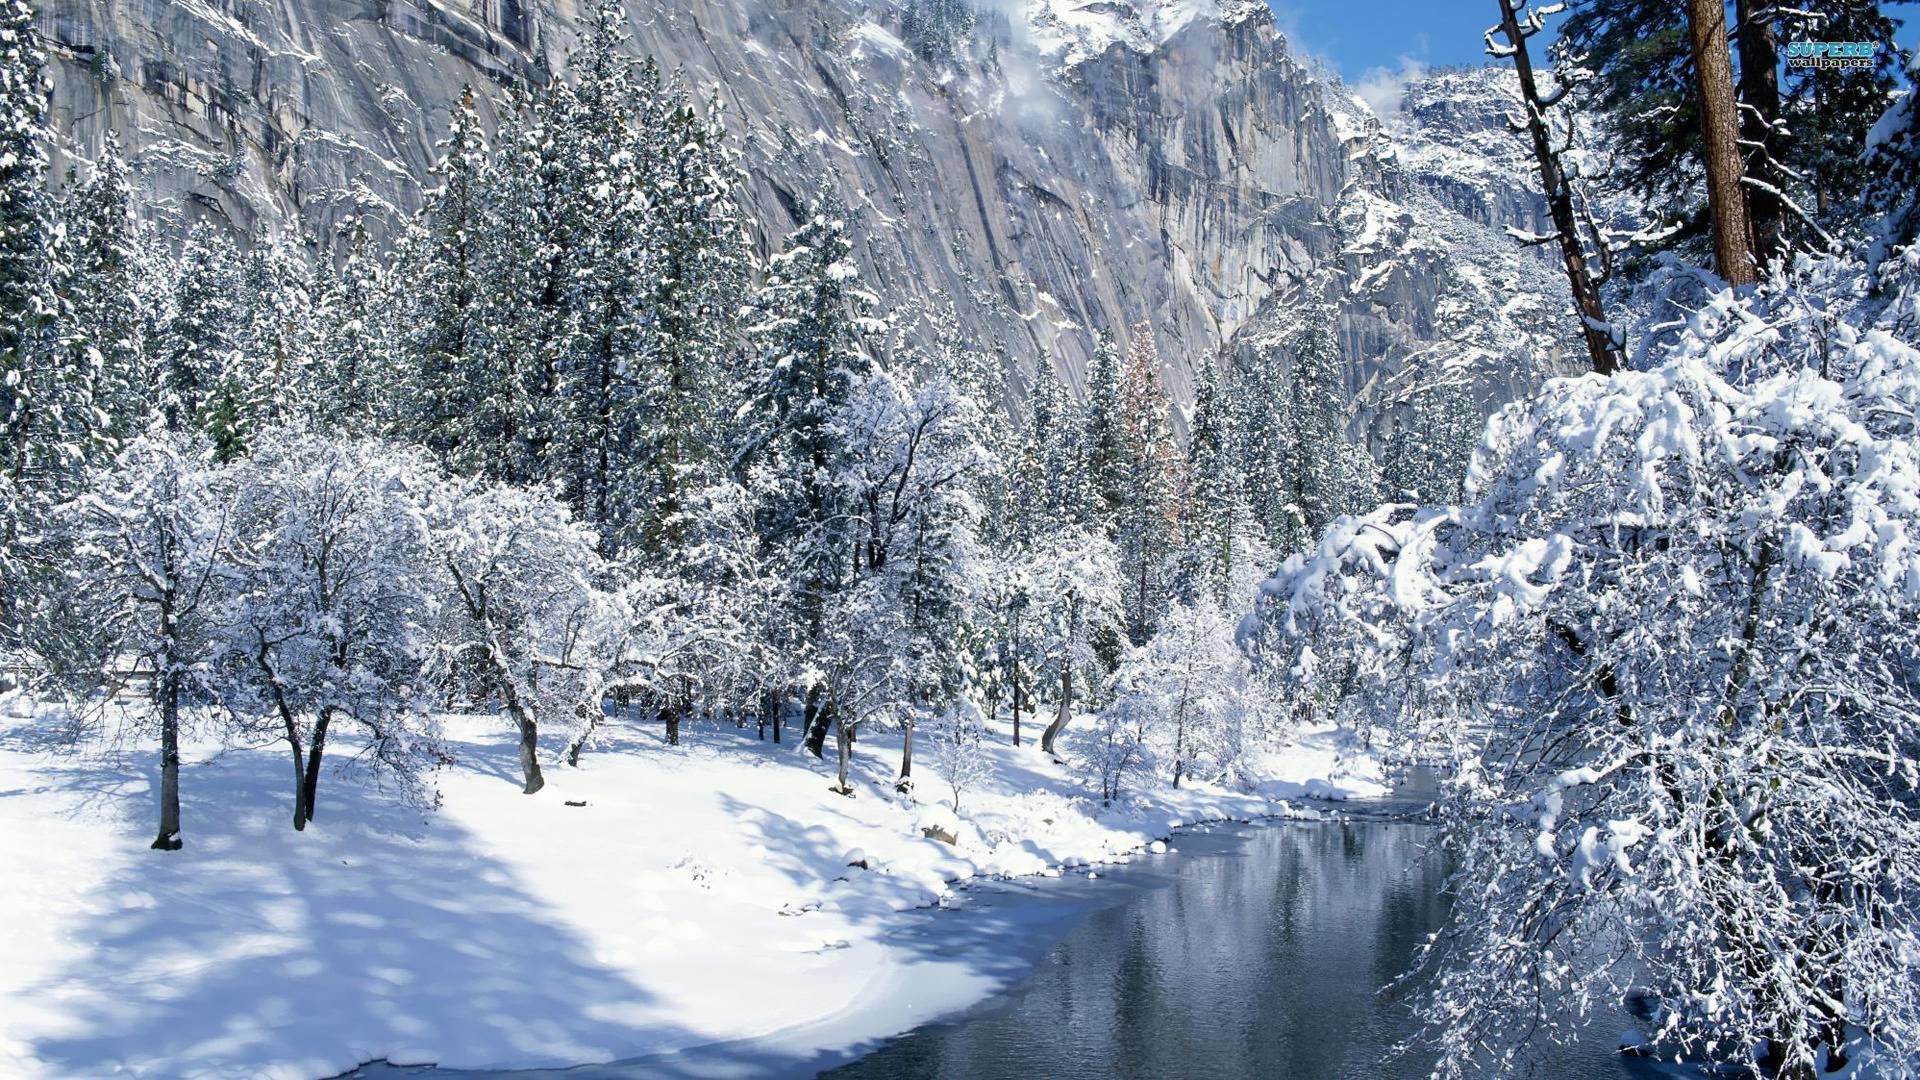 1920x1080 Creek in the snowy mountains wallpaper - Nature wallpapers - #